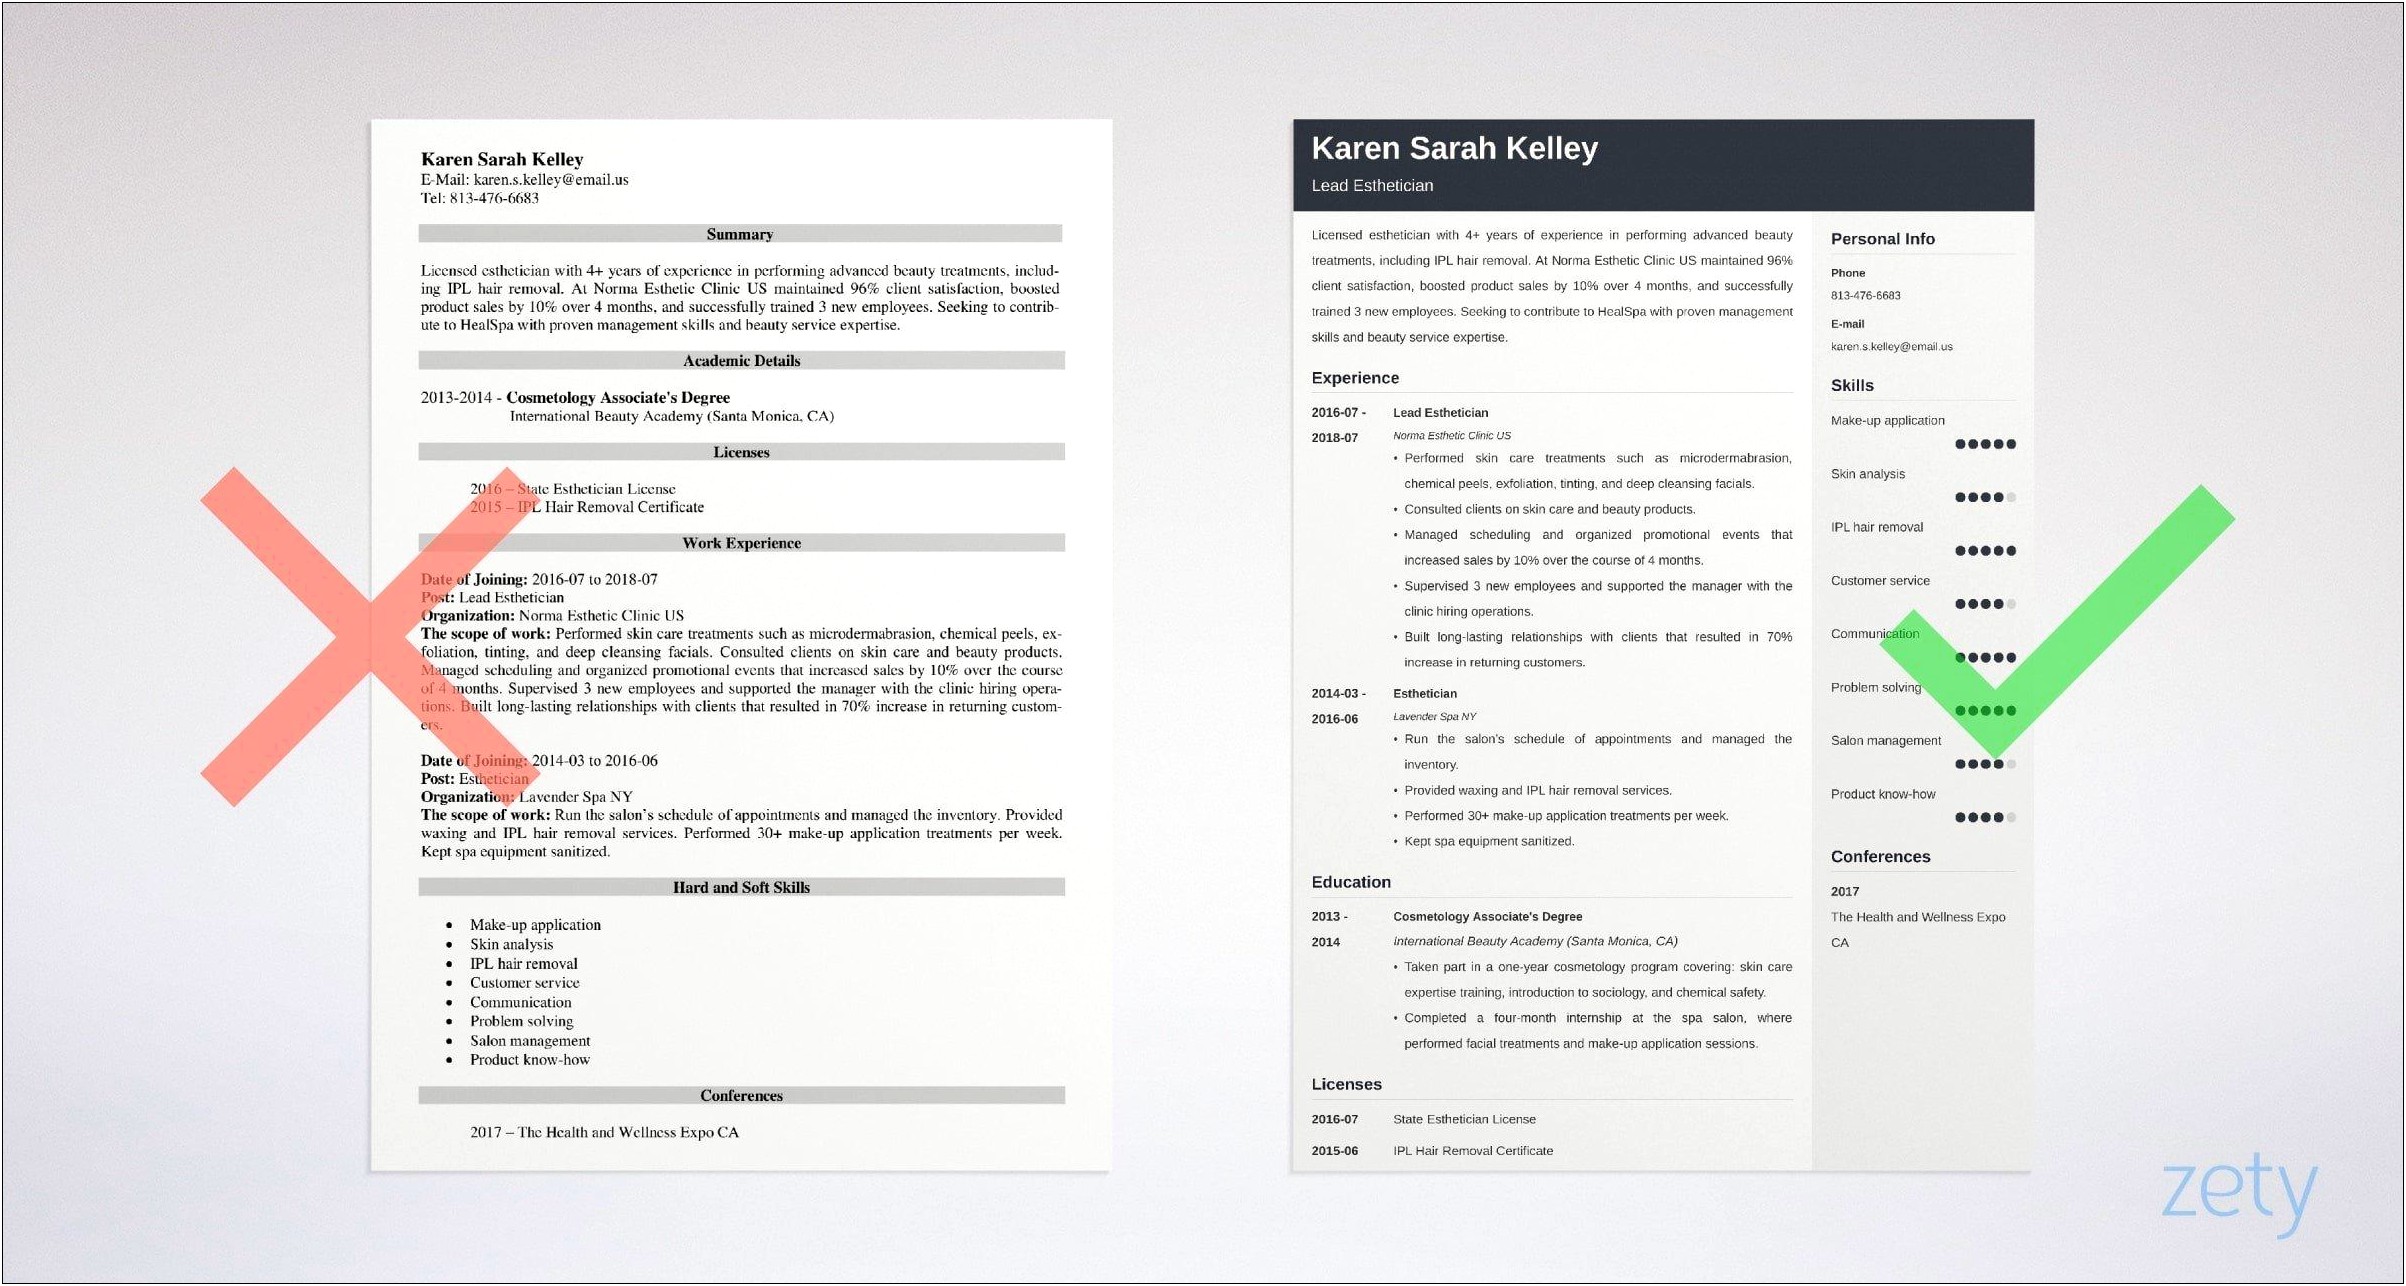 Newly Licensed Esthetician Resume Samples